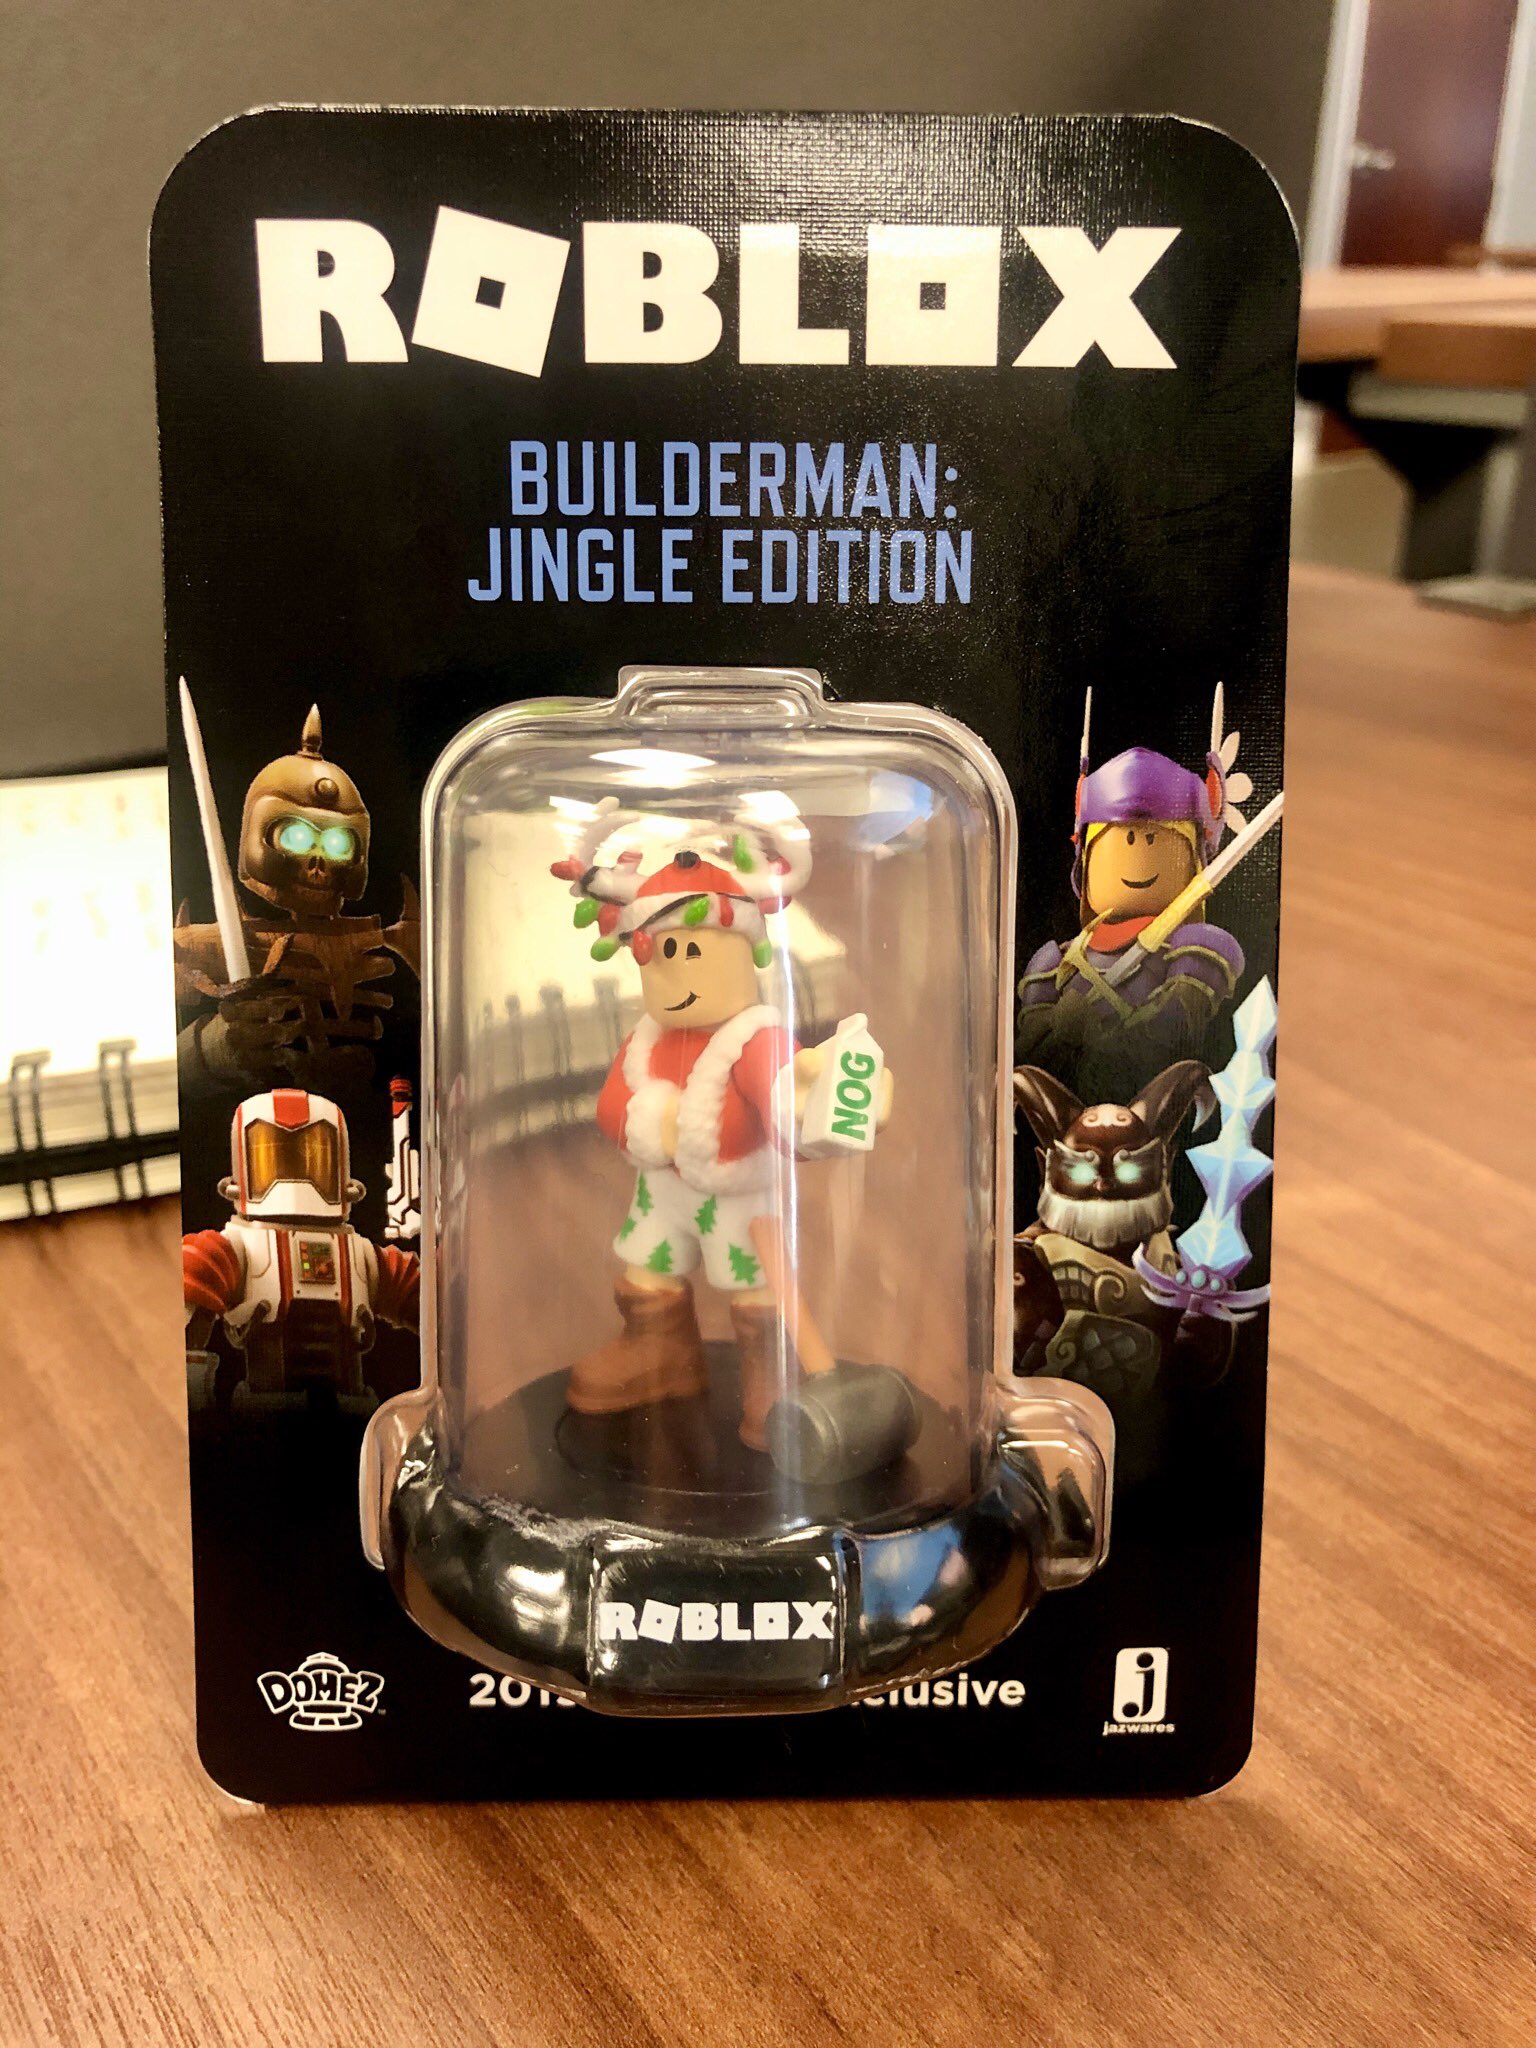 Carina Ngai On Twitter One Of The Holiday Gifts From Roblox